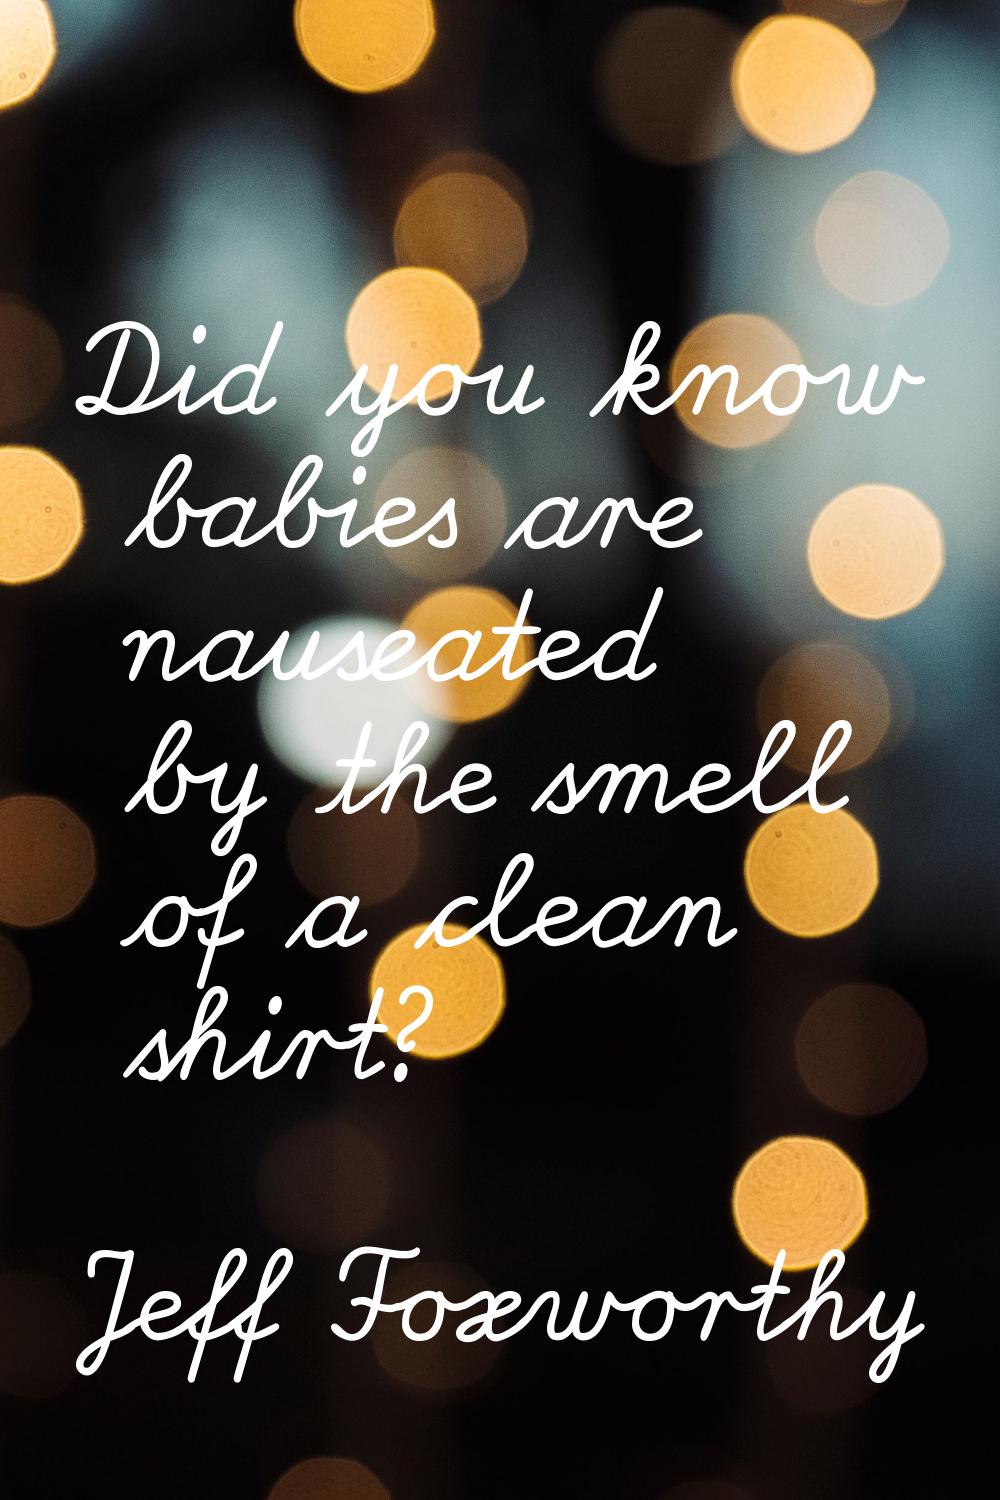 Did you know babies are nauseated by the smell of a clean shirt?